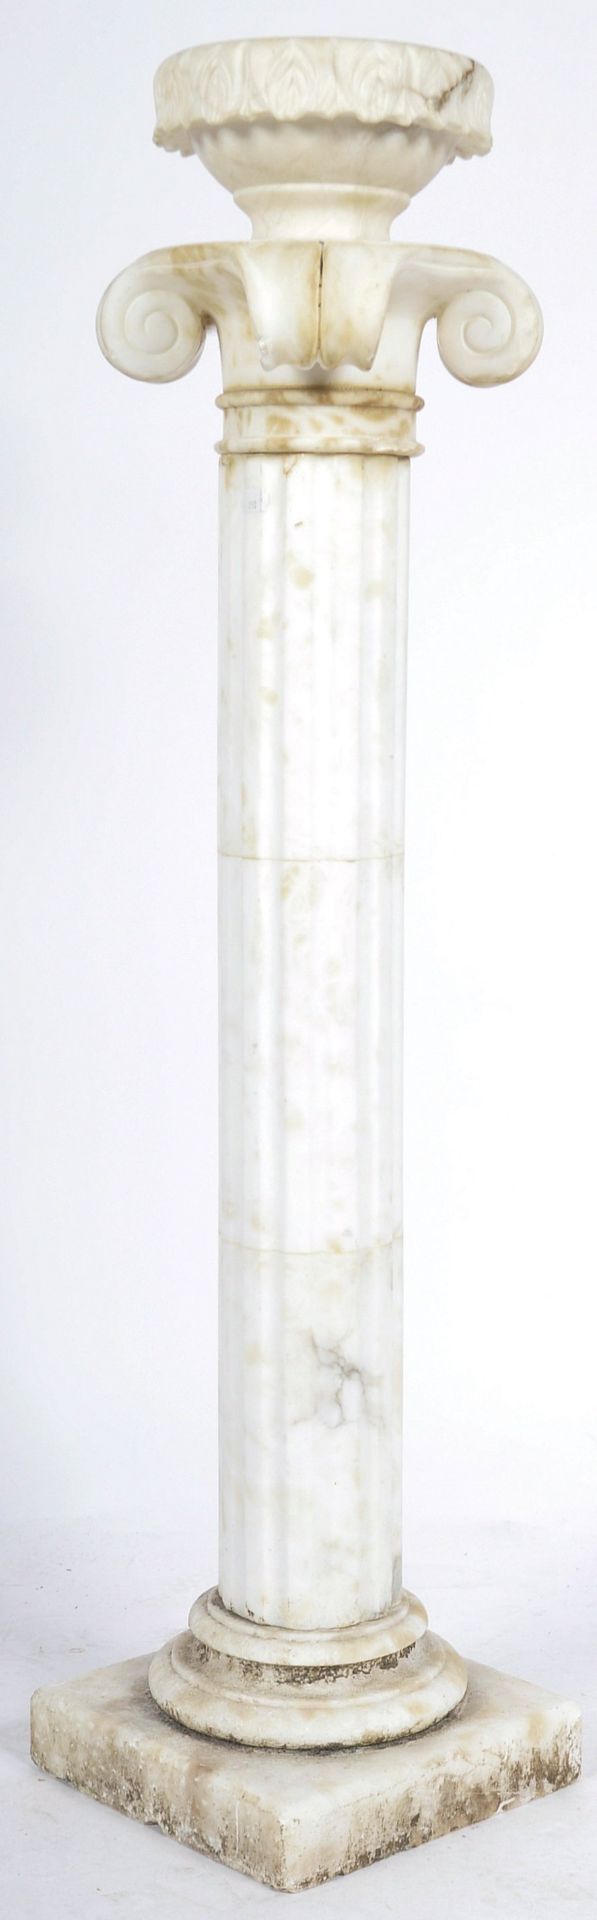 19TH CENTURY WHITE MARBLE COLUMN WITH BOWL